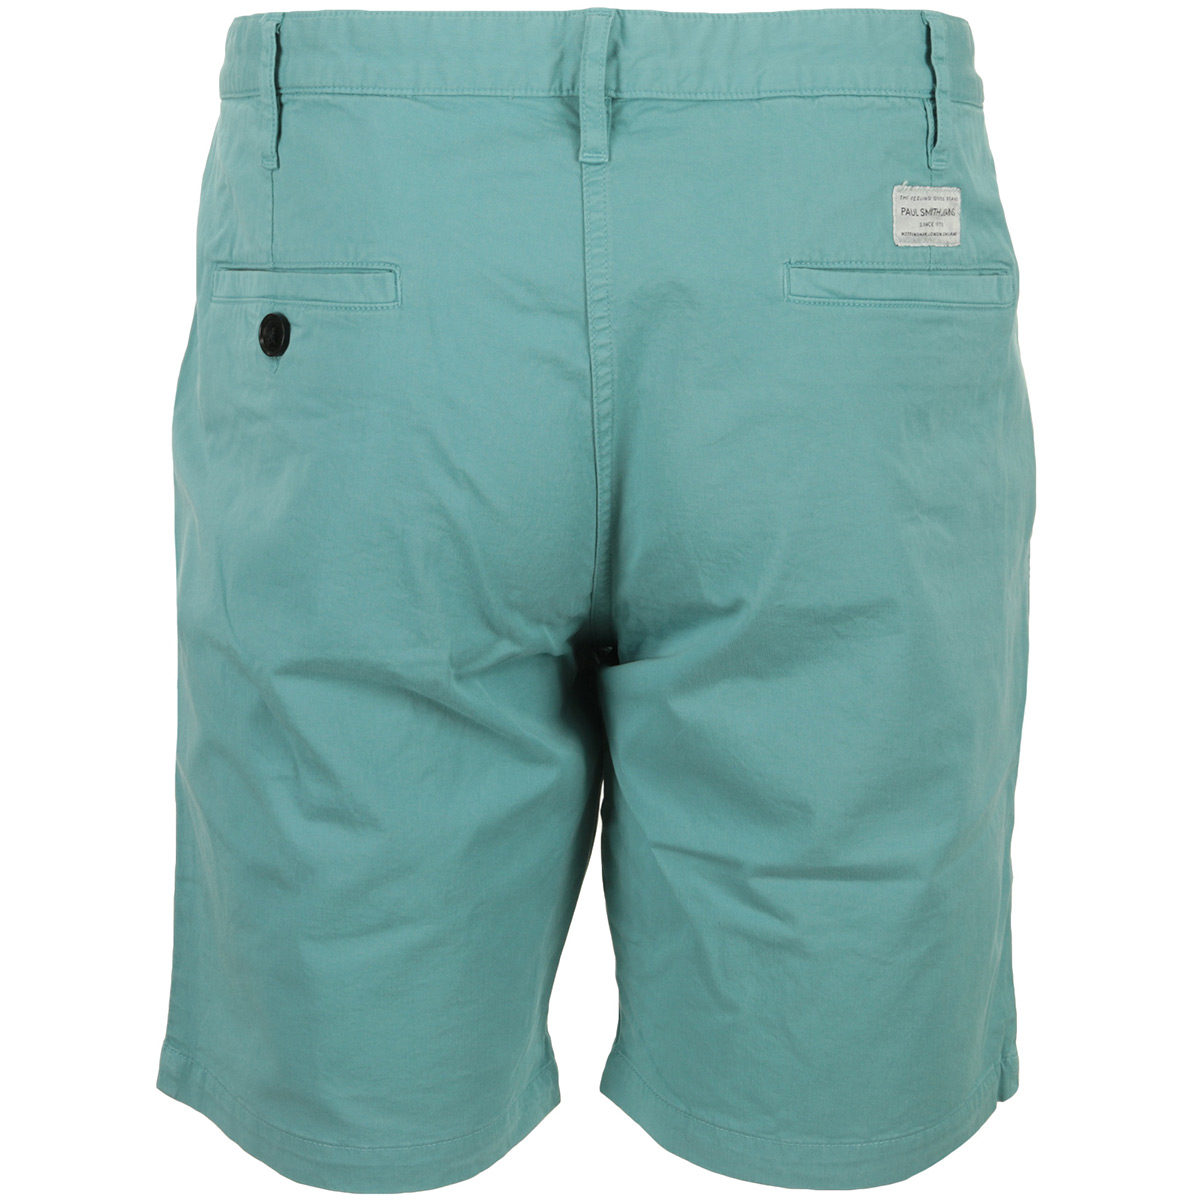 Paul Smith Jeans Standard Fit Shorts